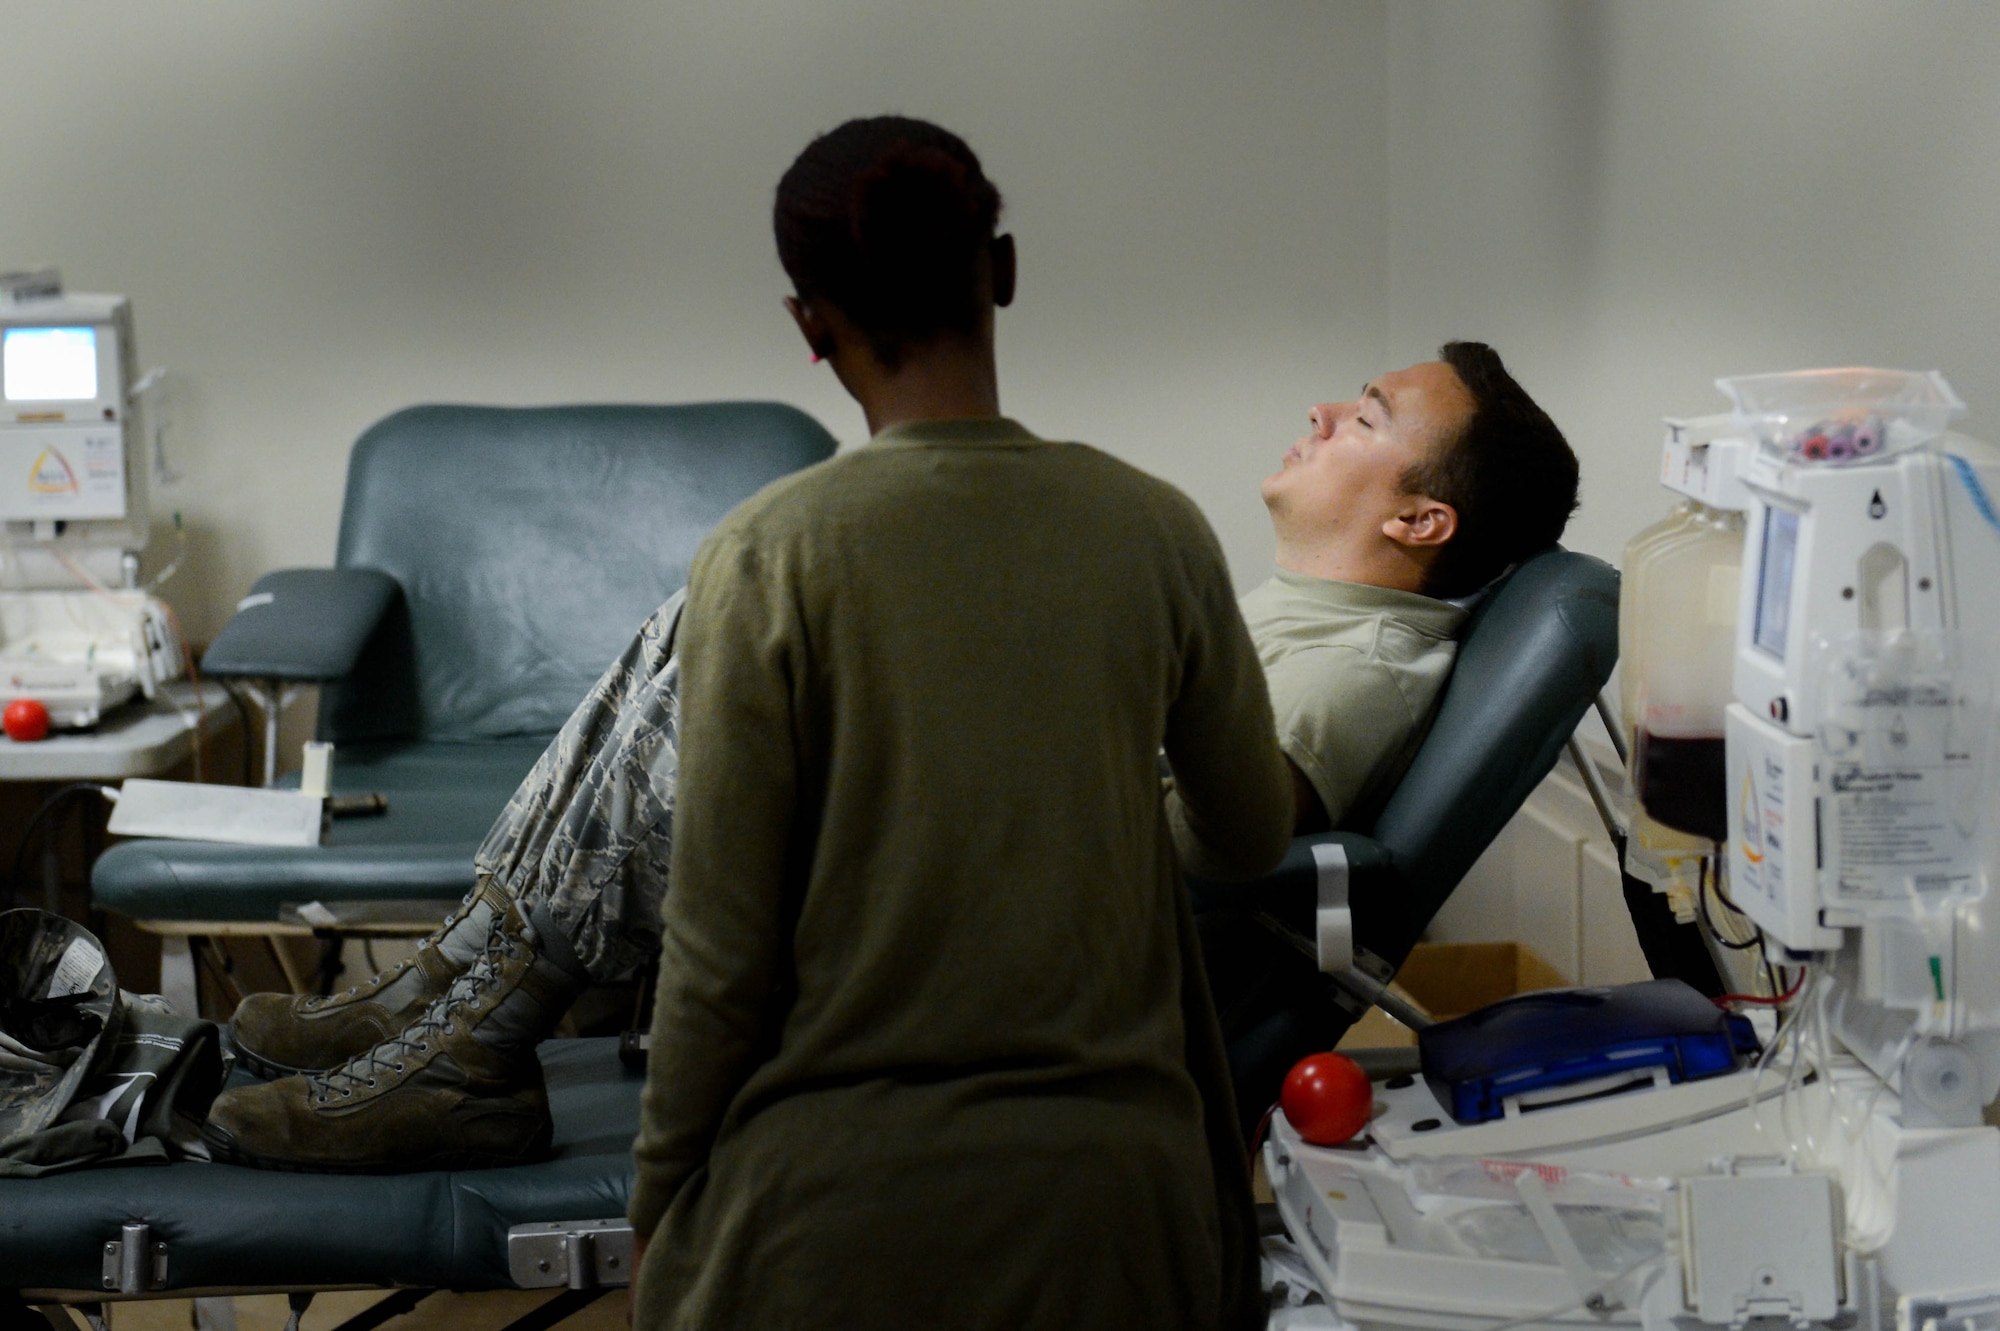 A LifeShare technician assists a donor as he gives blood during the 2017 LifeShare Blood Drive at Barksdale Air Force Base, La., June 16, 2017. Approximately 32,000 pints of blood are used each day in the United States. (U.S. Air Force Photo/Airman 1st Class Sydney Bennett)